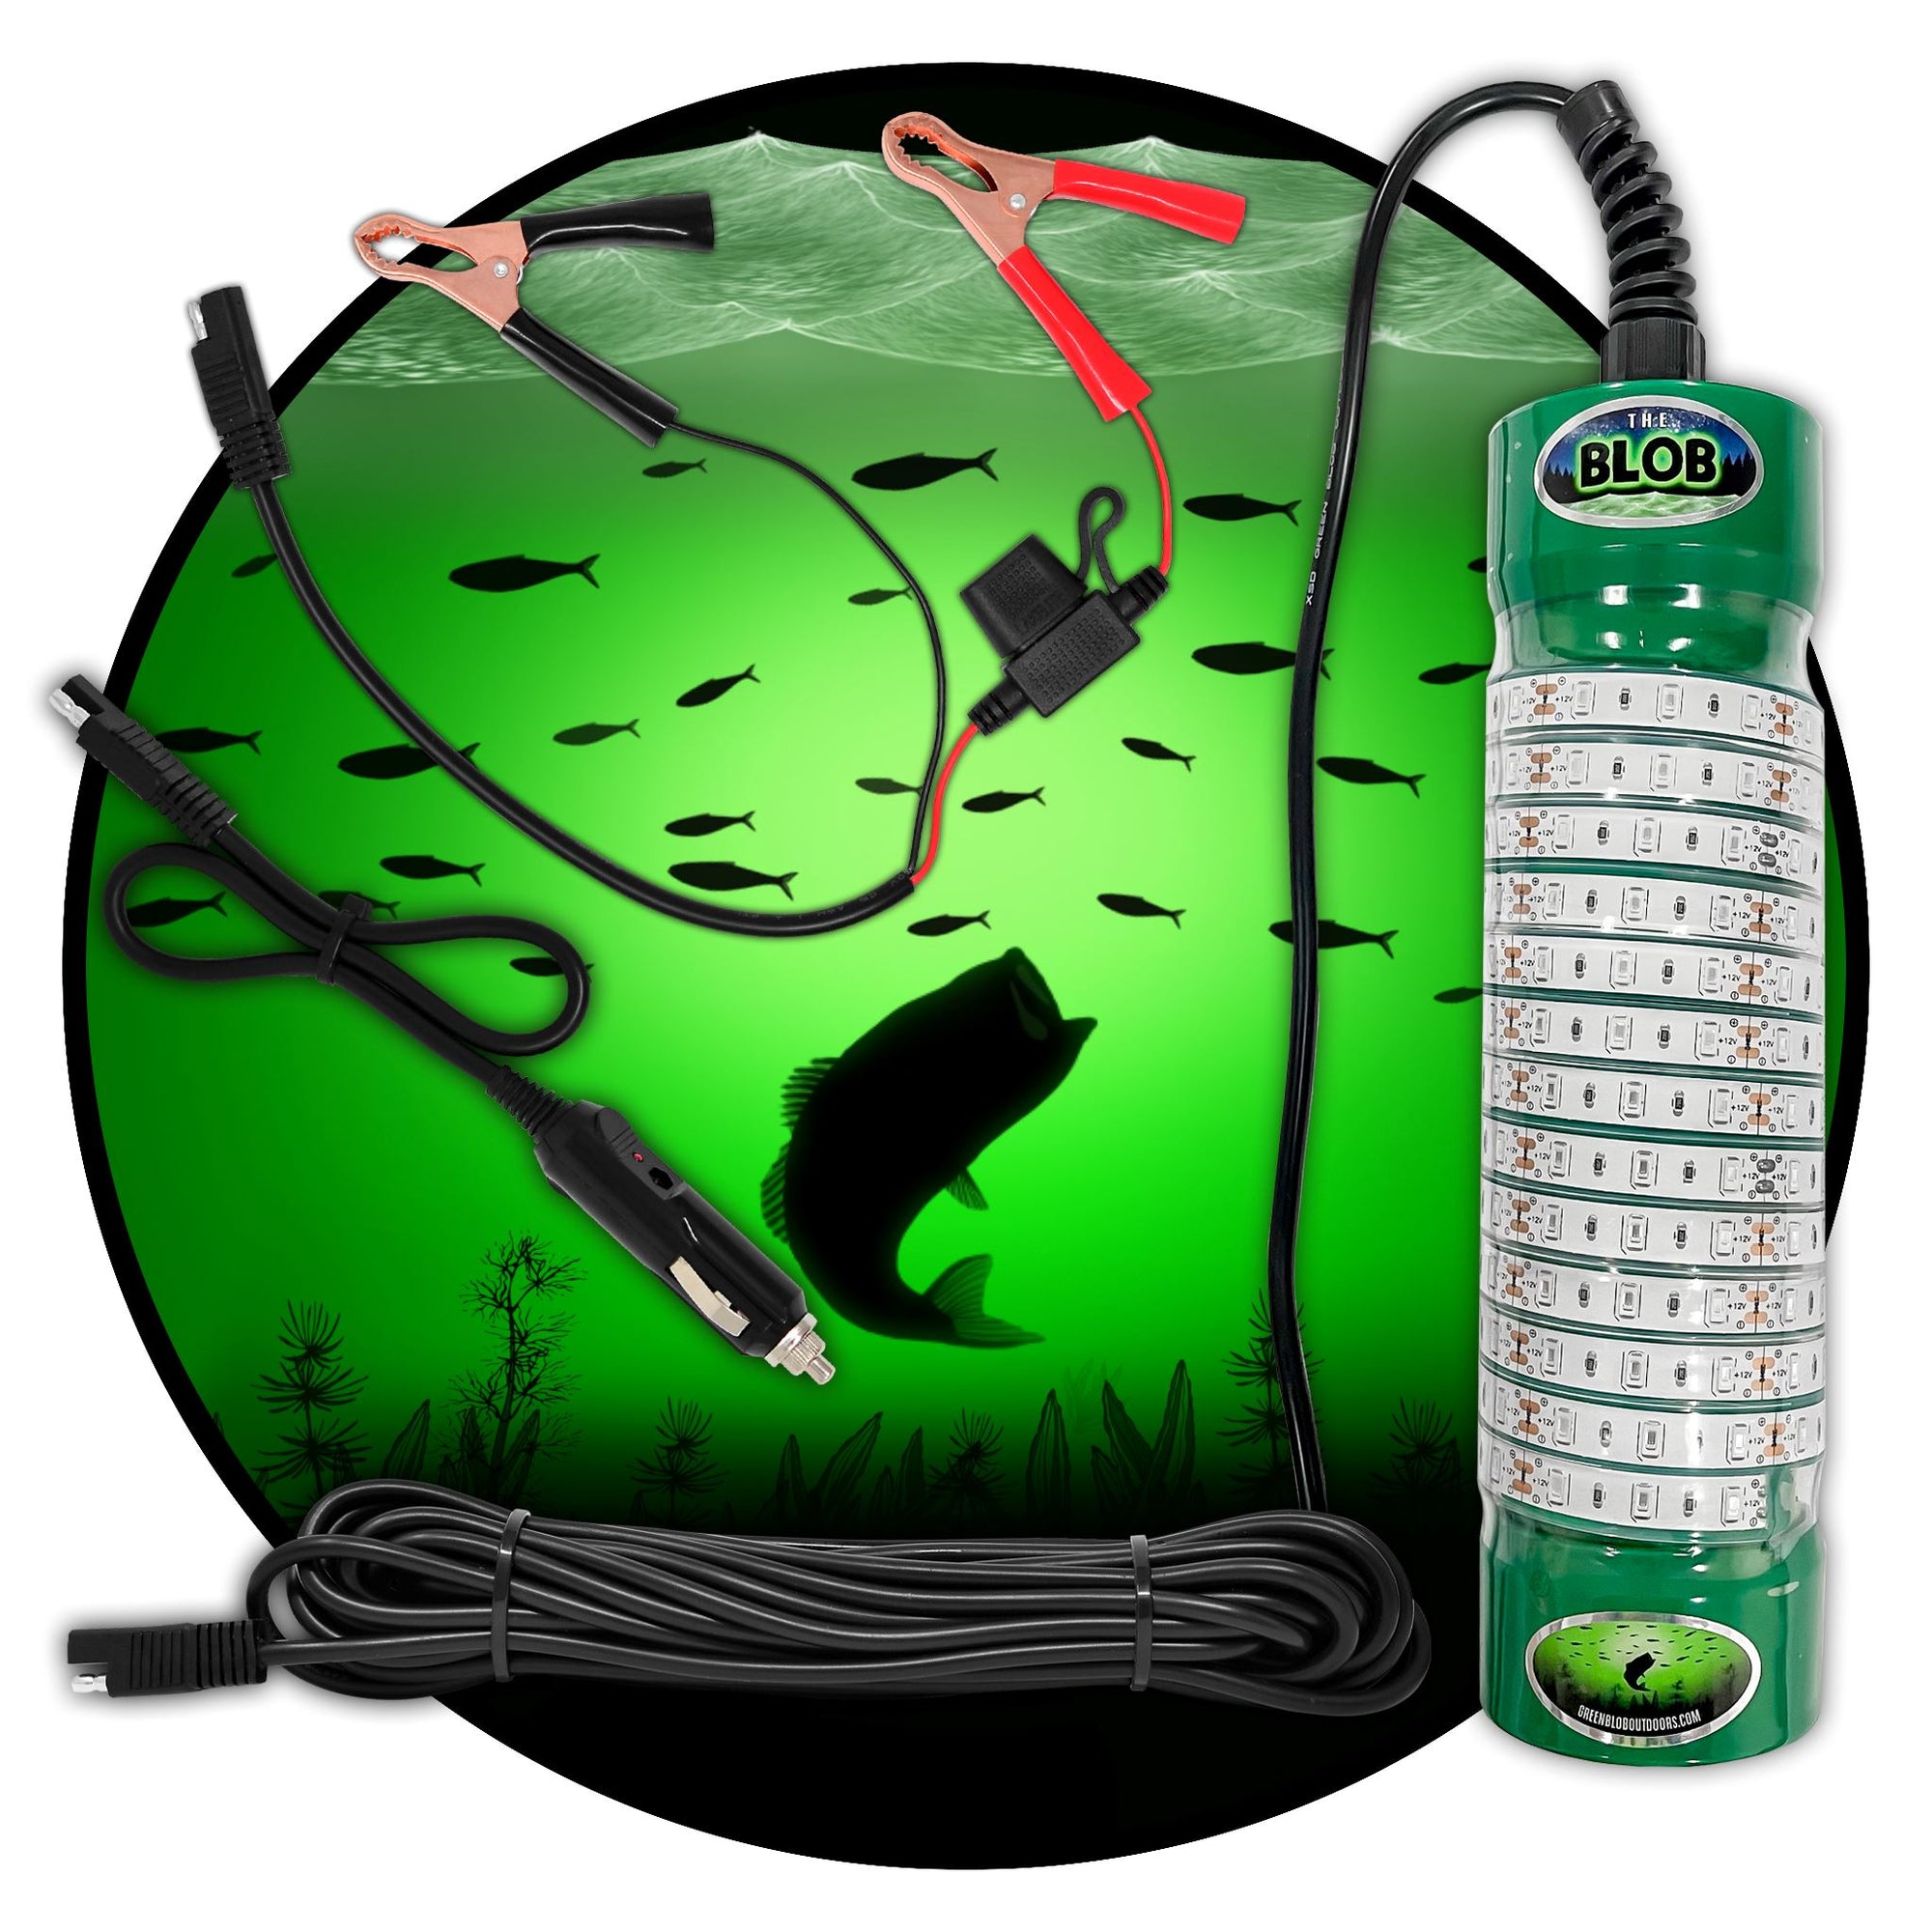 Green Blob Outdoors Underwater Fishing Light 7500 Lumen for Boats includes Alligator Clips & Cigarette Lighter w/ 30ft Cord, Fishing Lights Green Blob Outdoors 